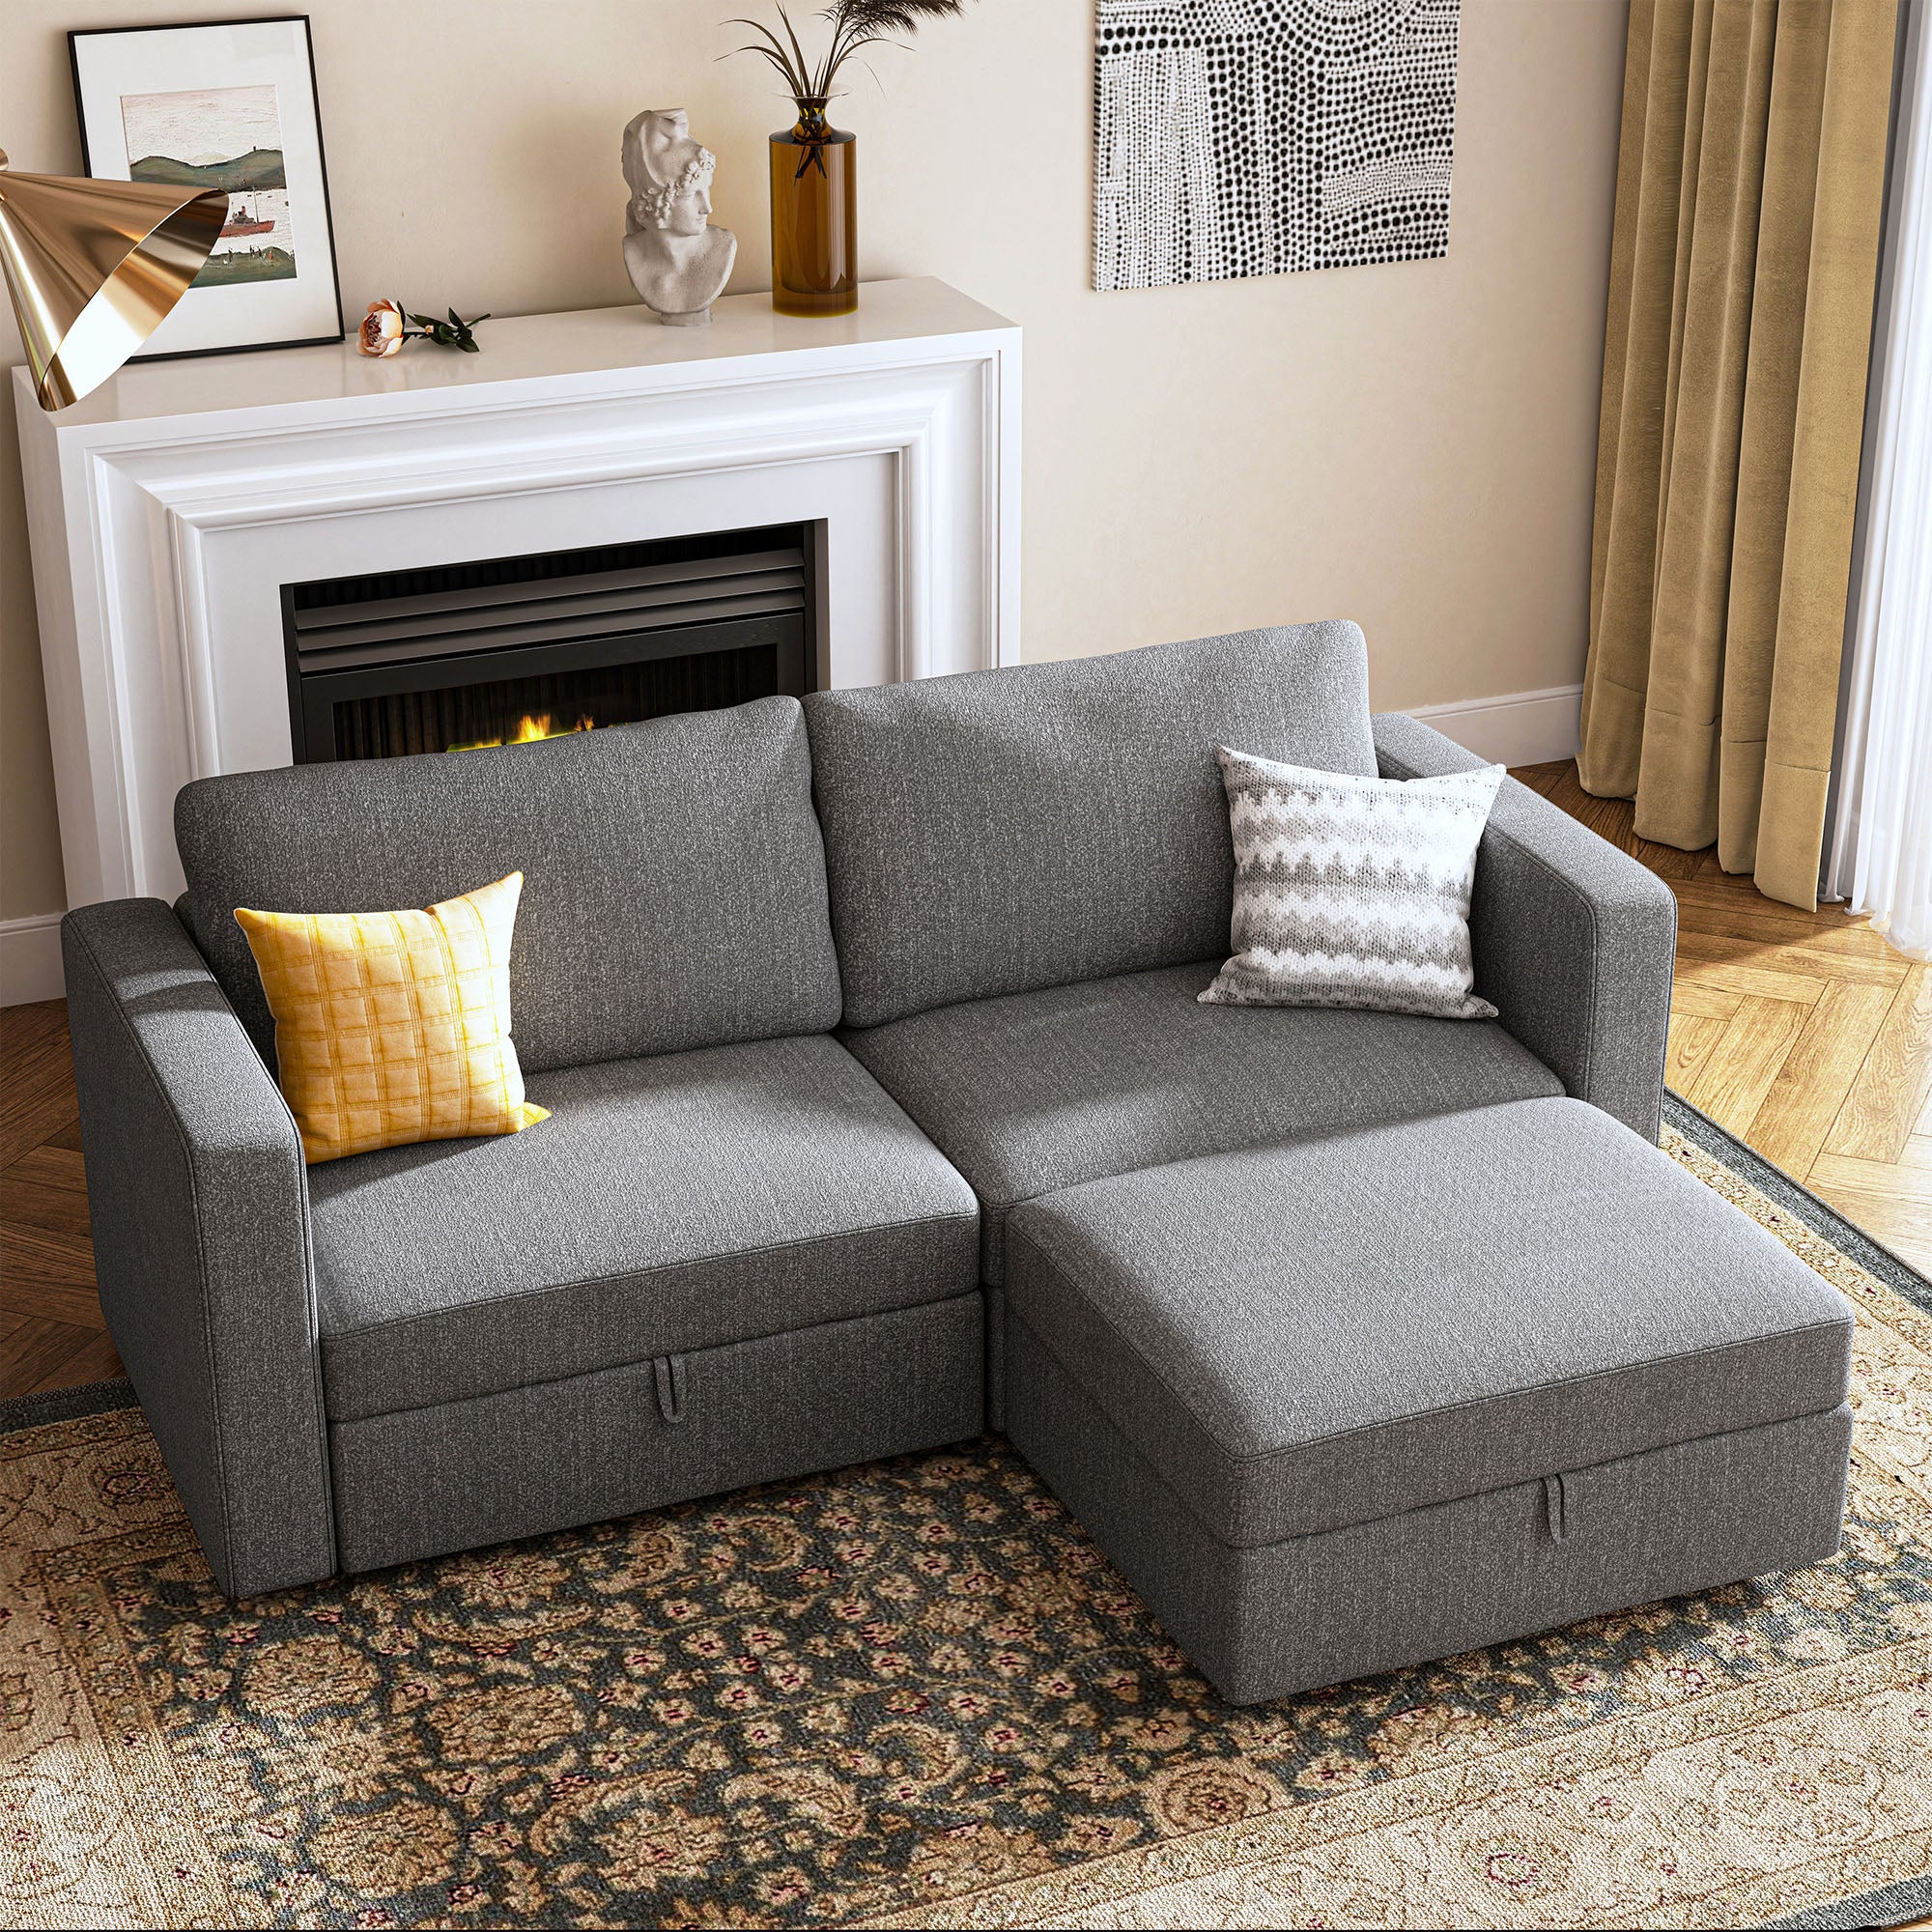 HONBAY Fabric Linen Grey Modular Loveseat Sofa with Reversible Storage Ottoman for Living Room